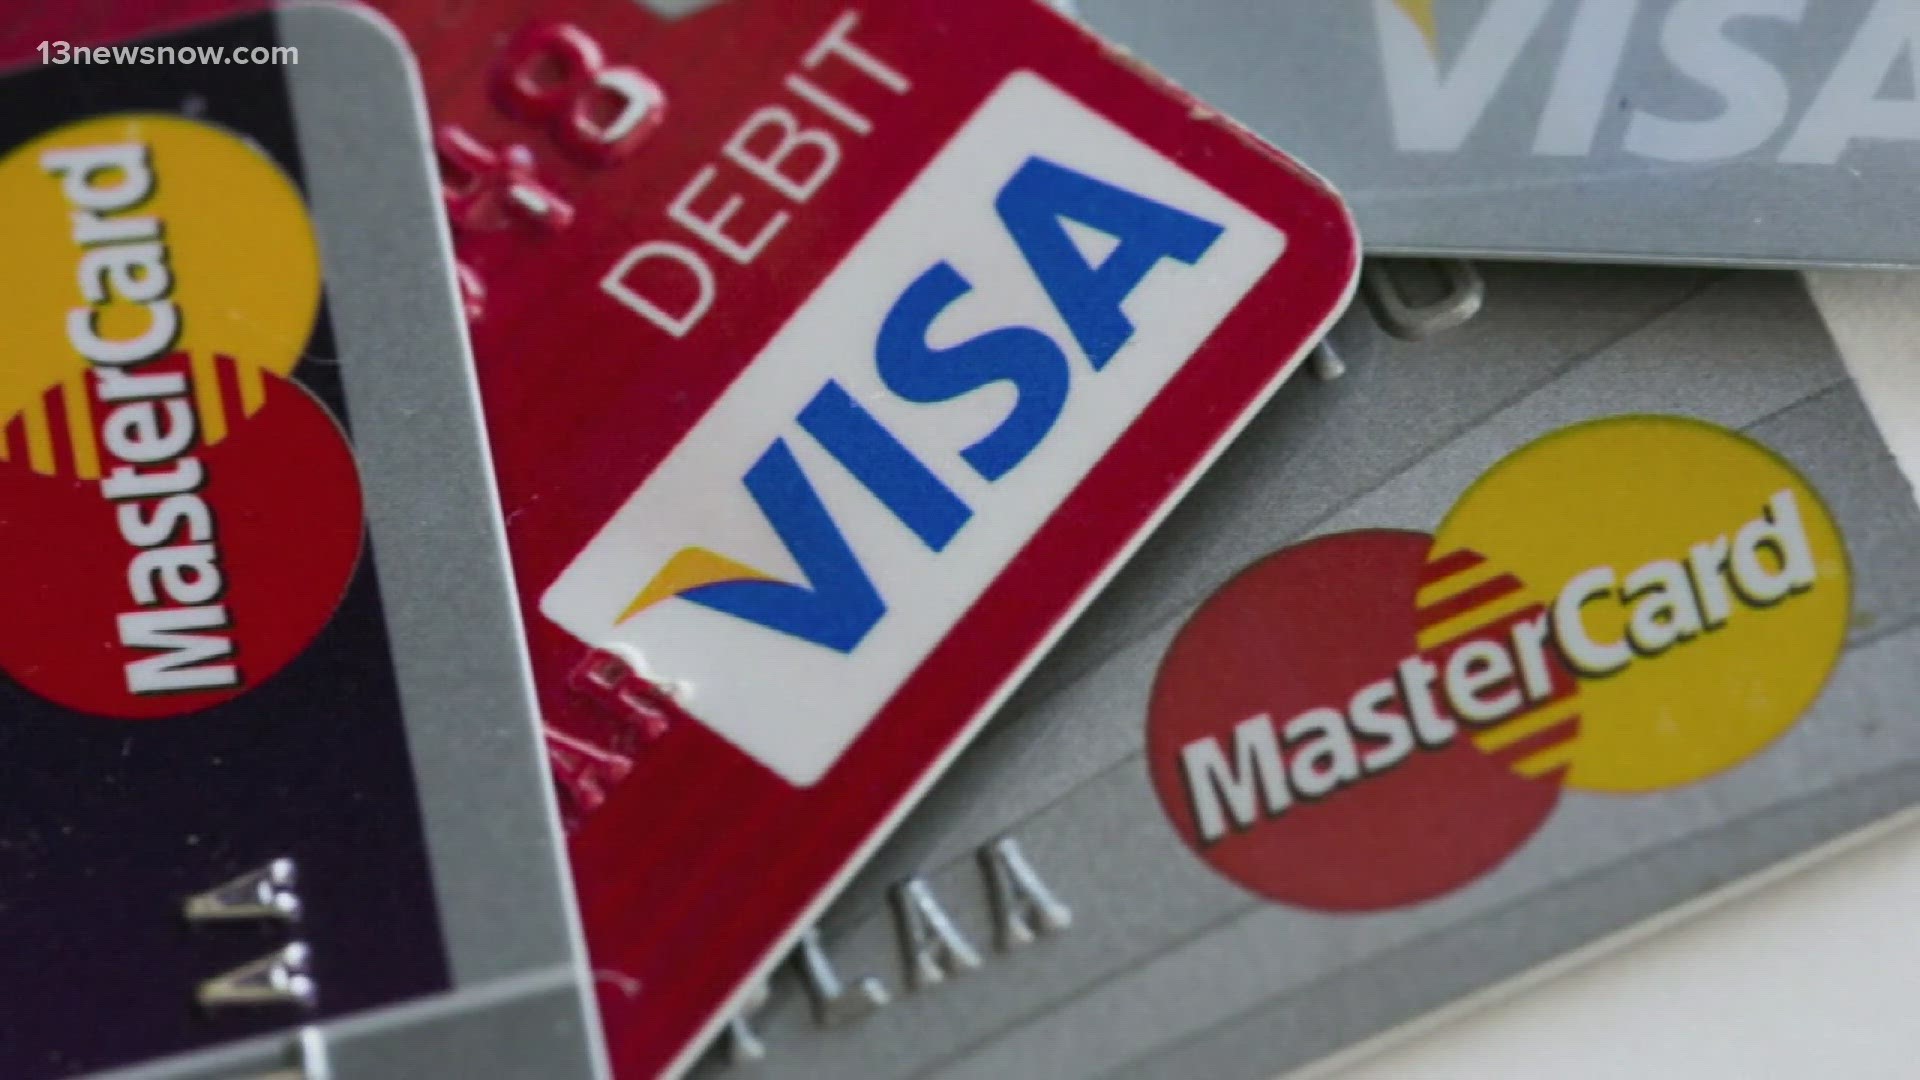 . But a historic anti-trust settlement could mean paying with a card will soon be cheaper.